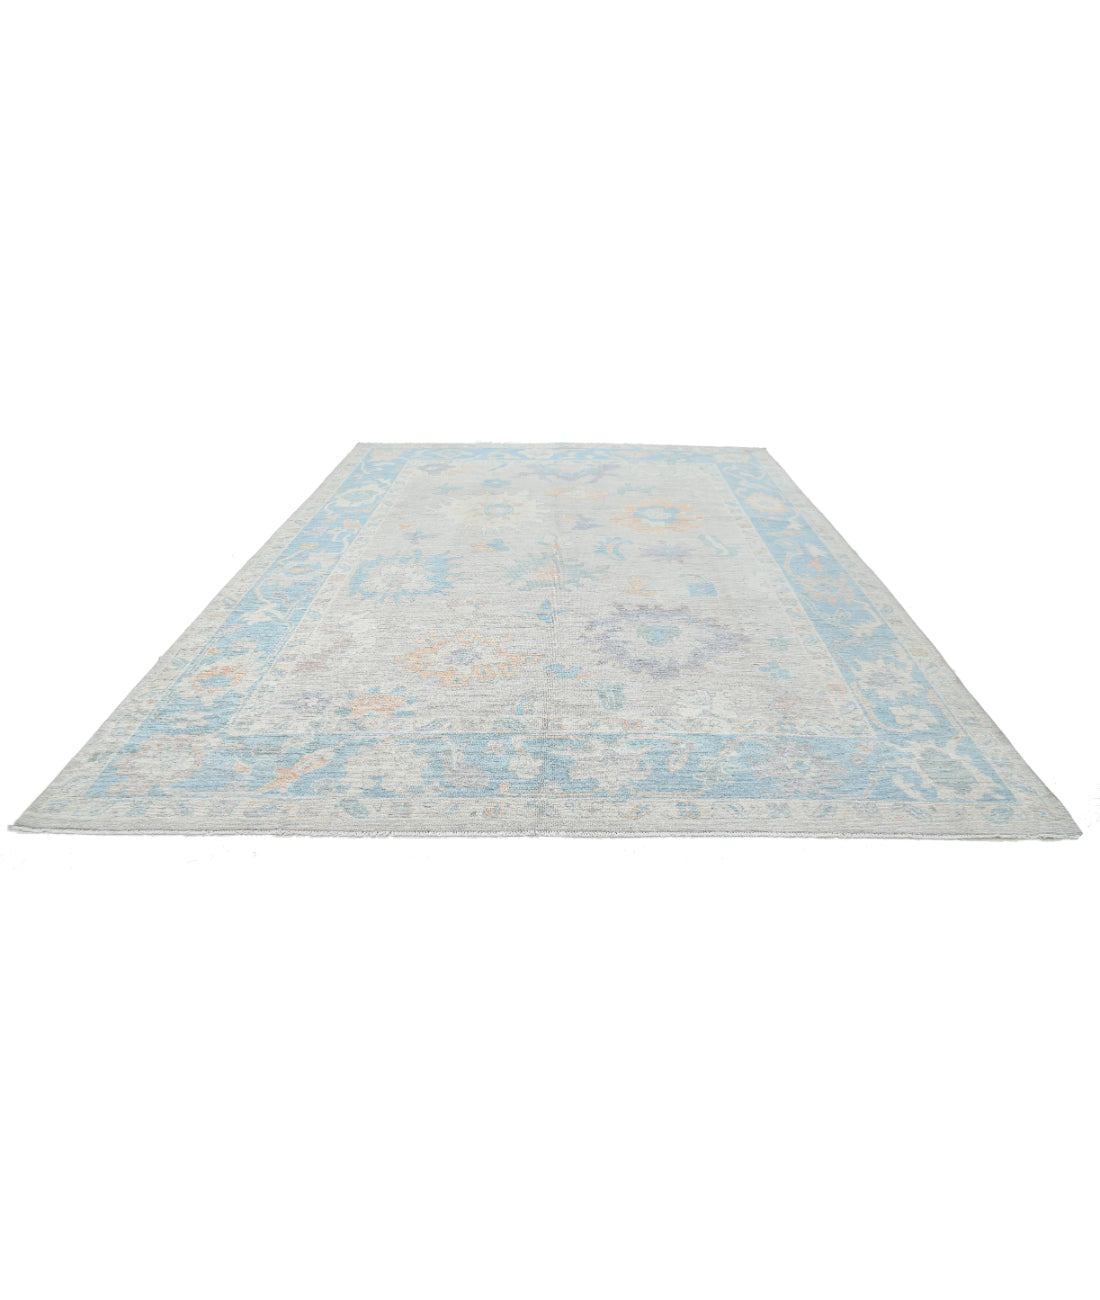 Hand Knotted Oushak Wool Rug - 10'3'' x 14'2'' 10'3'' x 14'2'' (308 X 425) / Grey / Blue